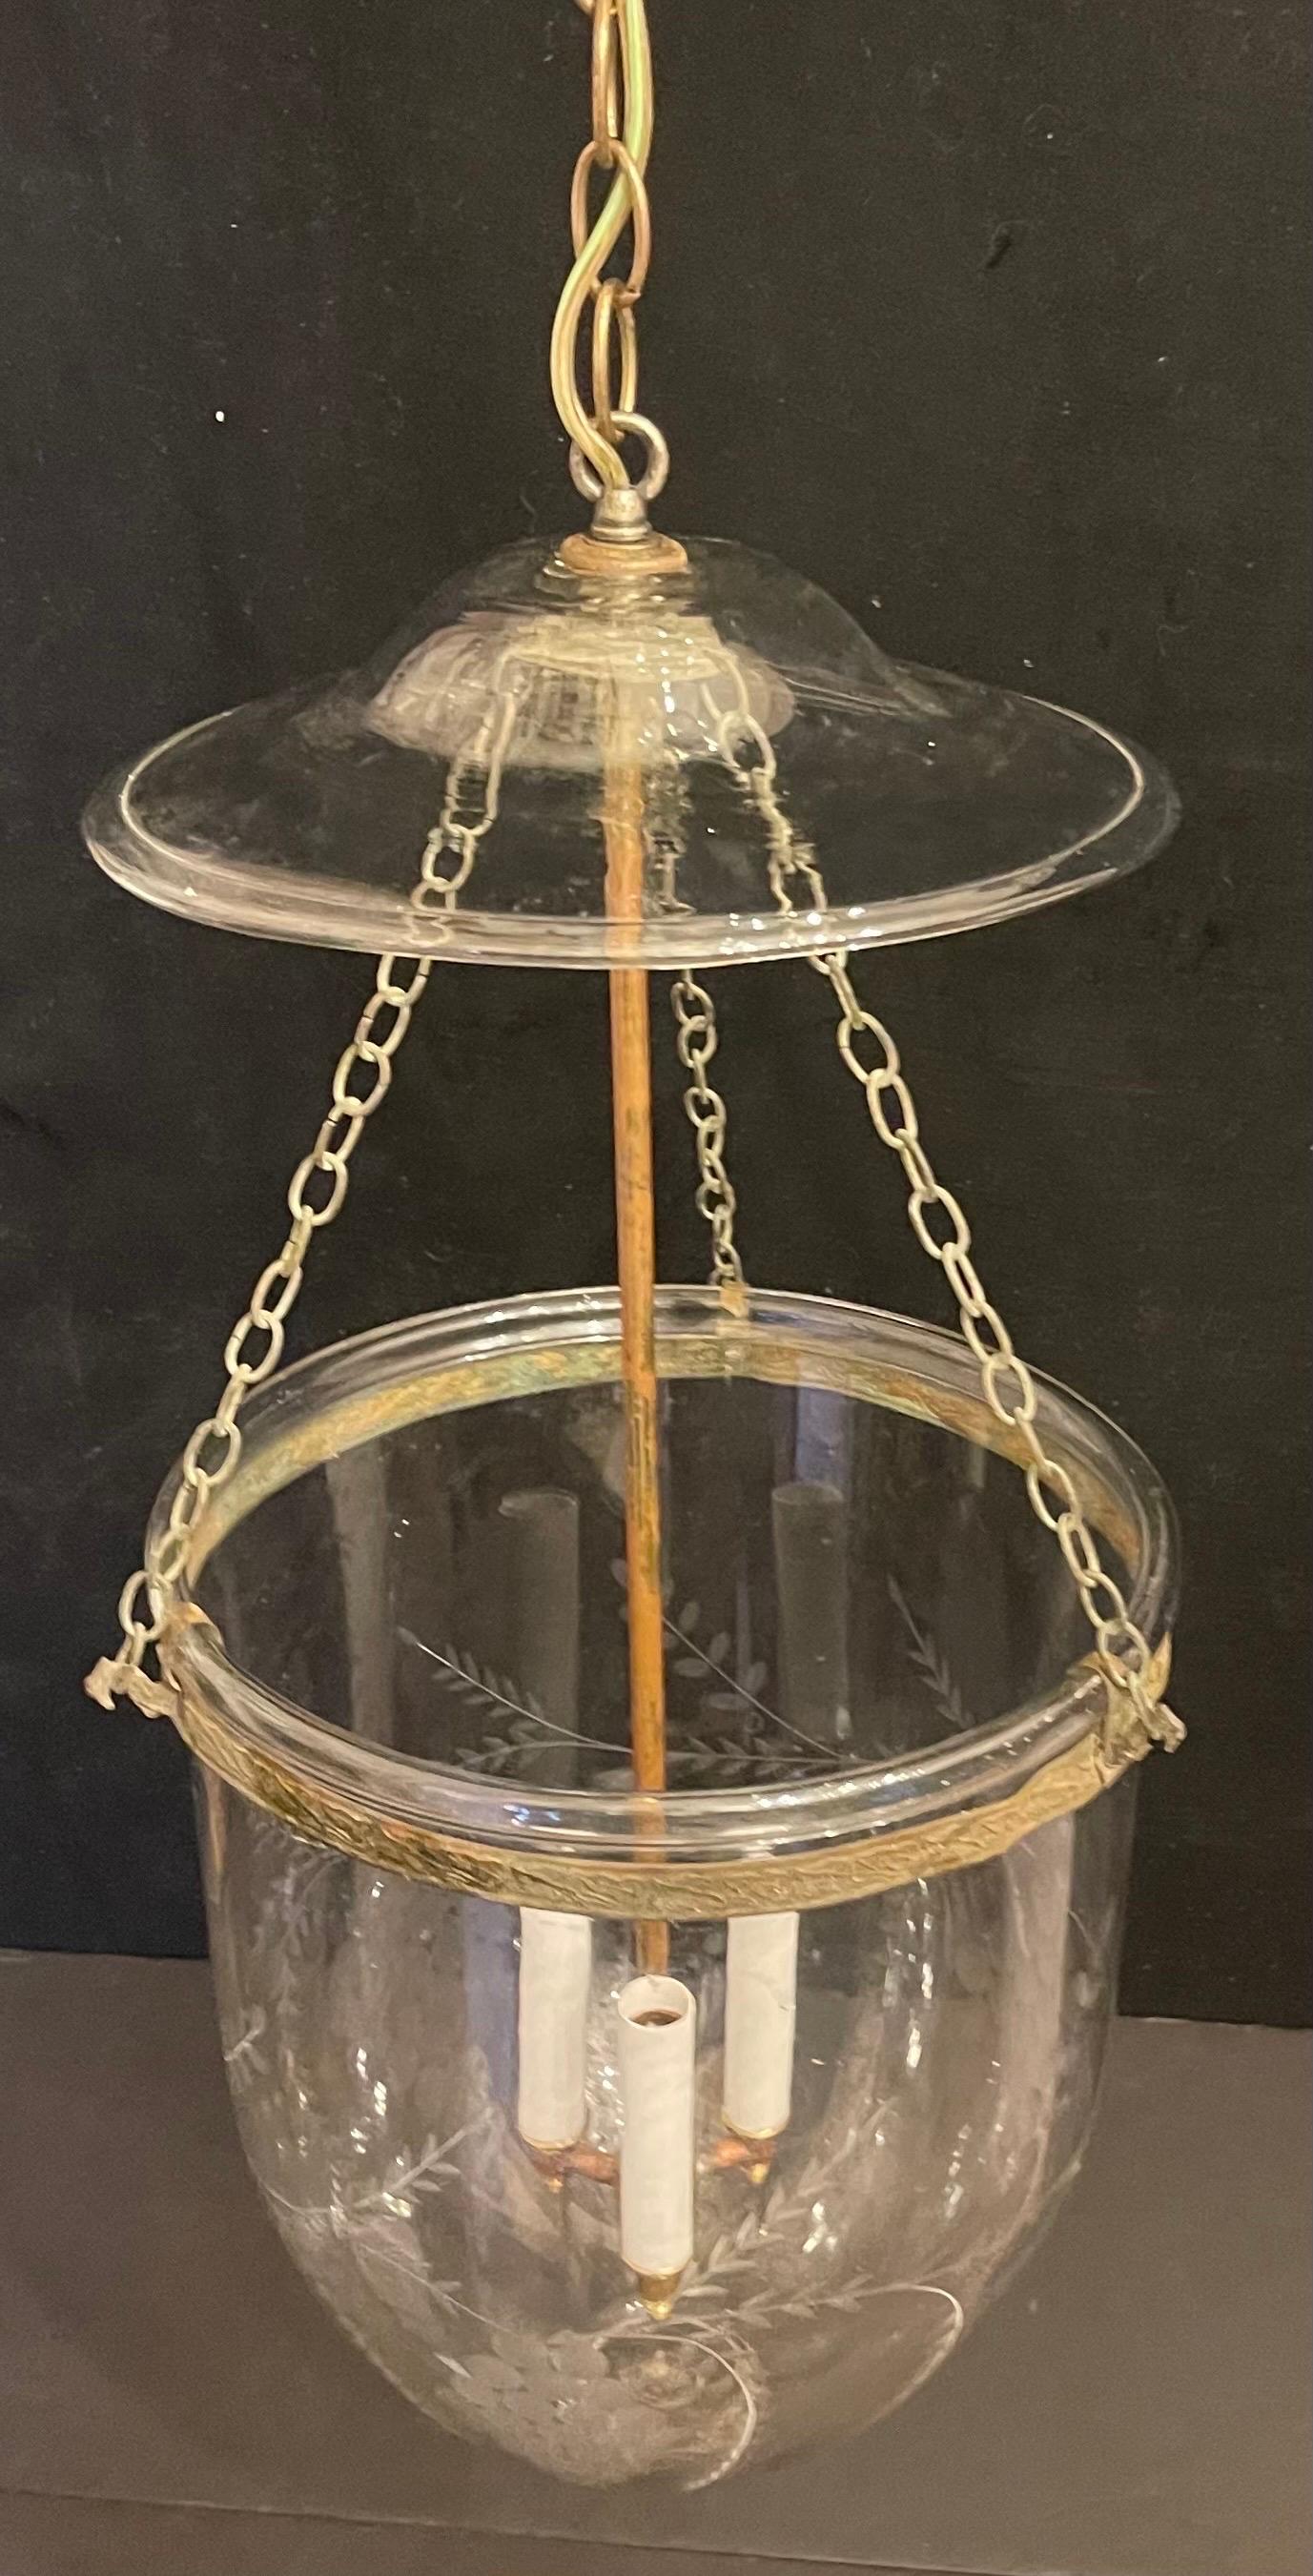 A fine large bell jar etched grapes and vines blown glass with bronze / brass rim in the neoclassical motif, this beautiful lantern fixtur has 3 candelabra lights on the inside and comes with chain canopy and mounting hardware
in the manner of